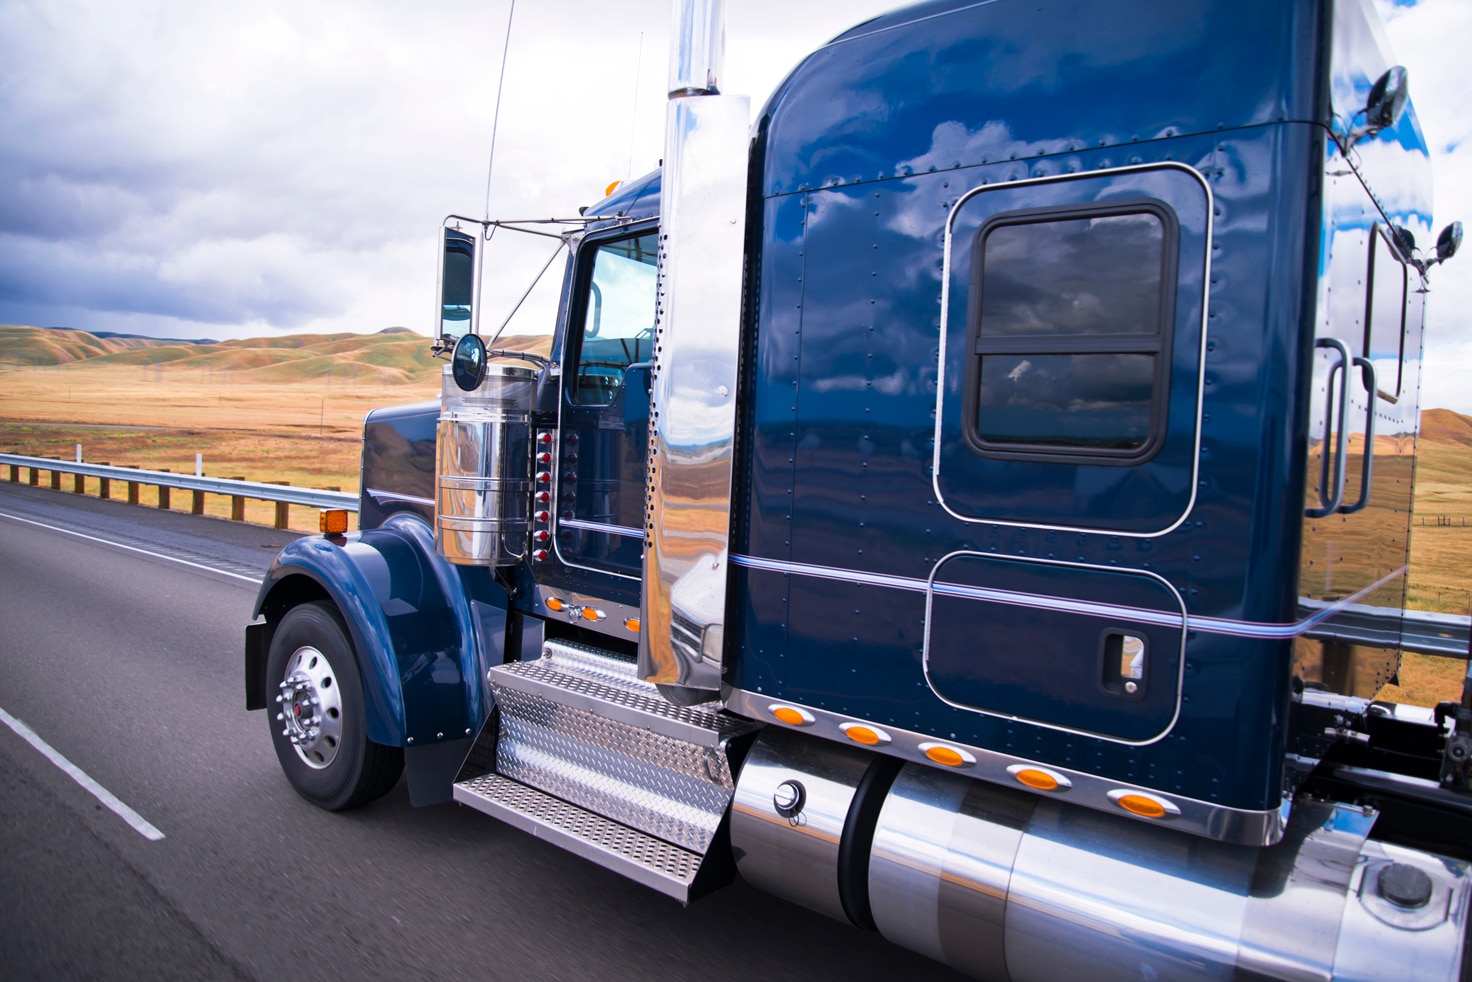 How Does Insurance Work with Commercial Truck Accident Liability?